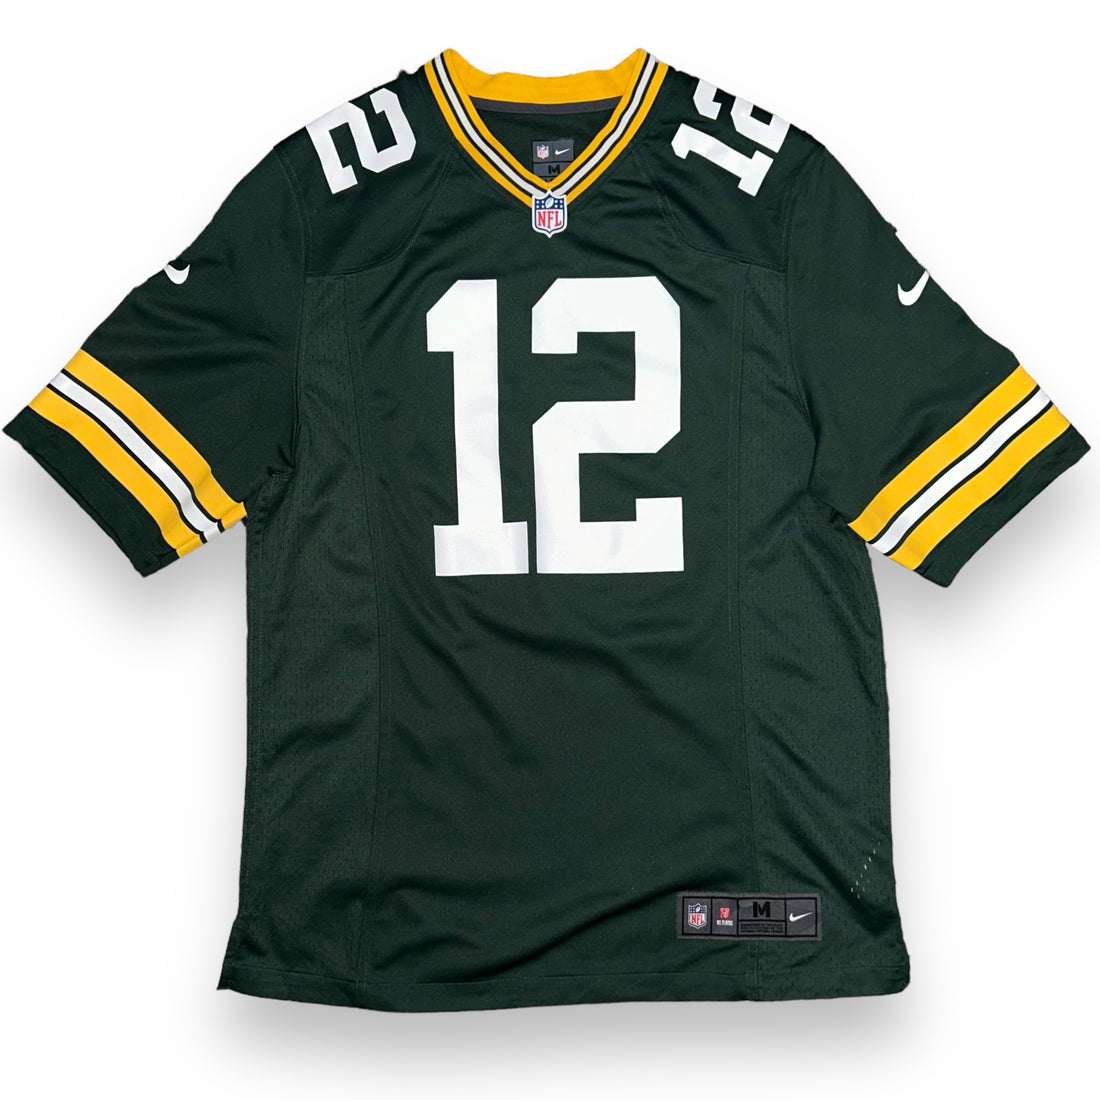 Jersey Green Bay Packers NFL  (XL)